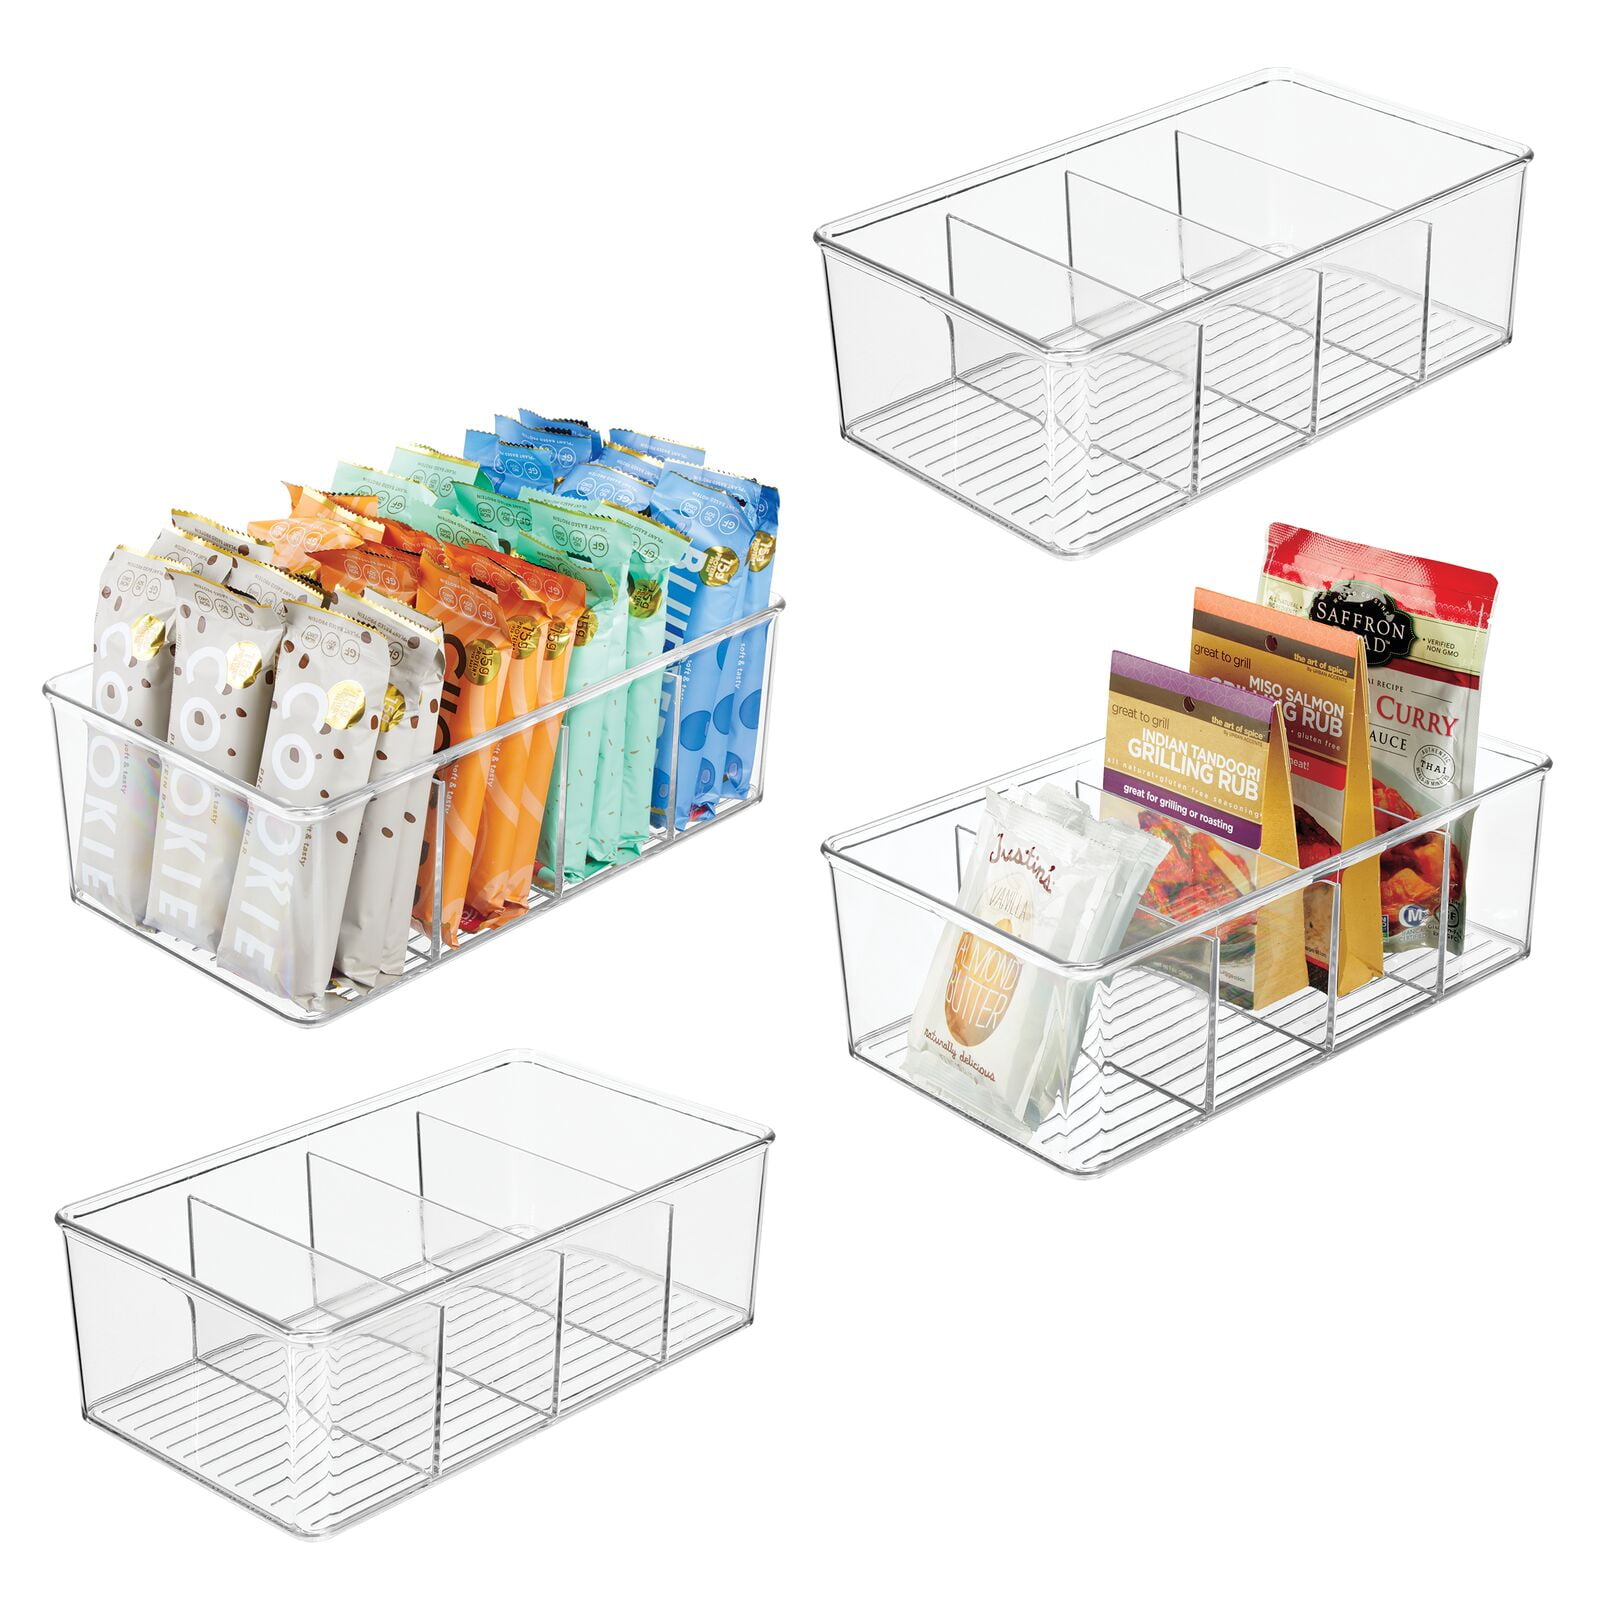 mDesign® Clear 4-Section Craft Caddy with Handle